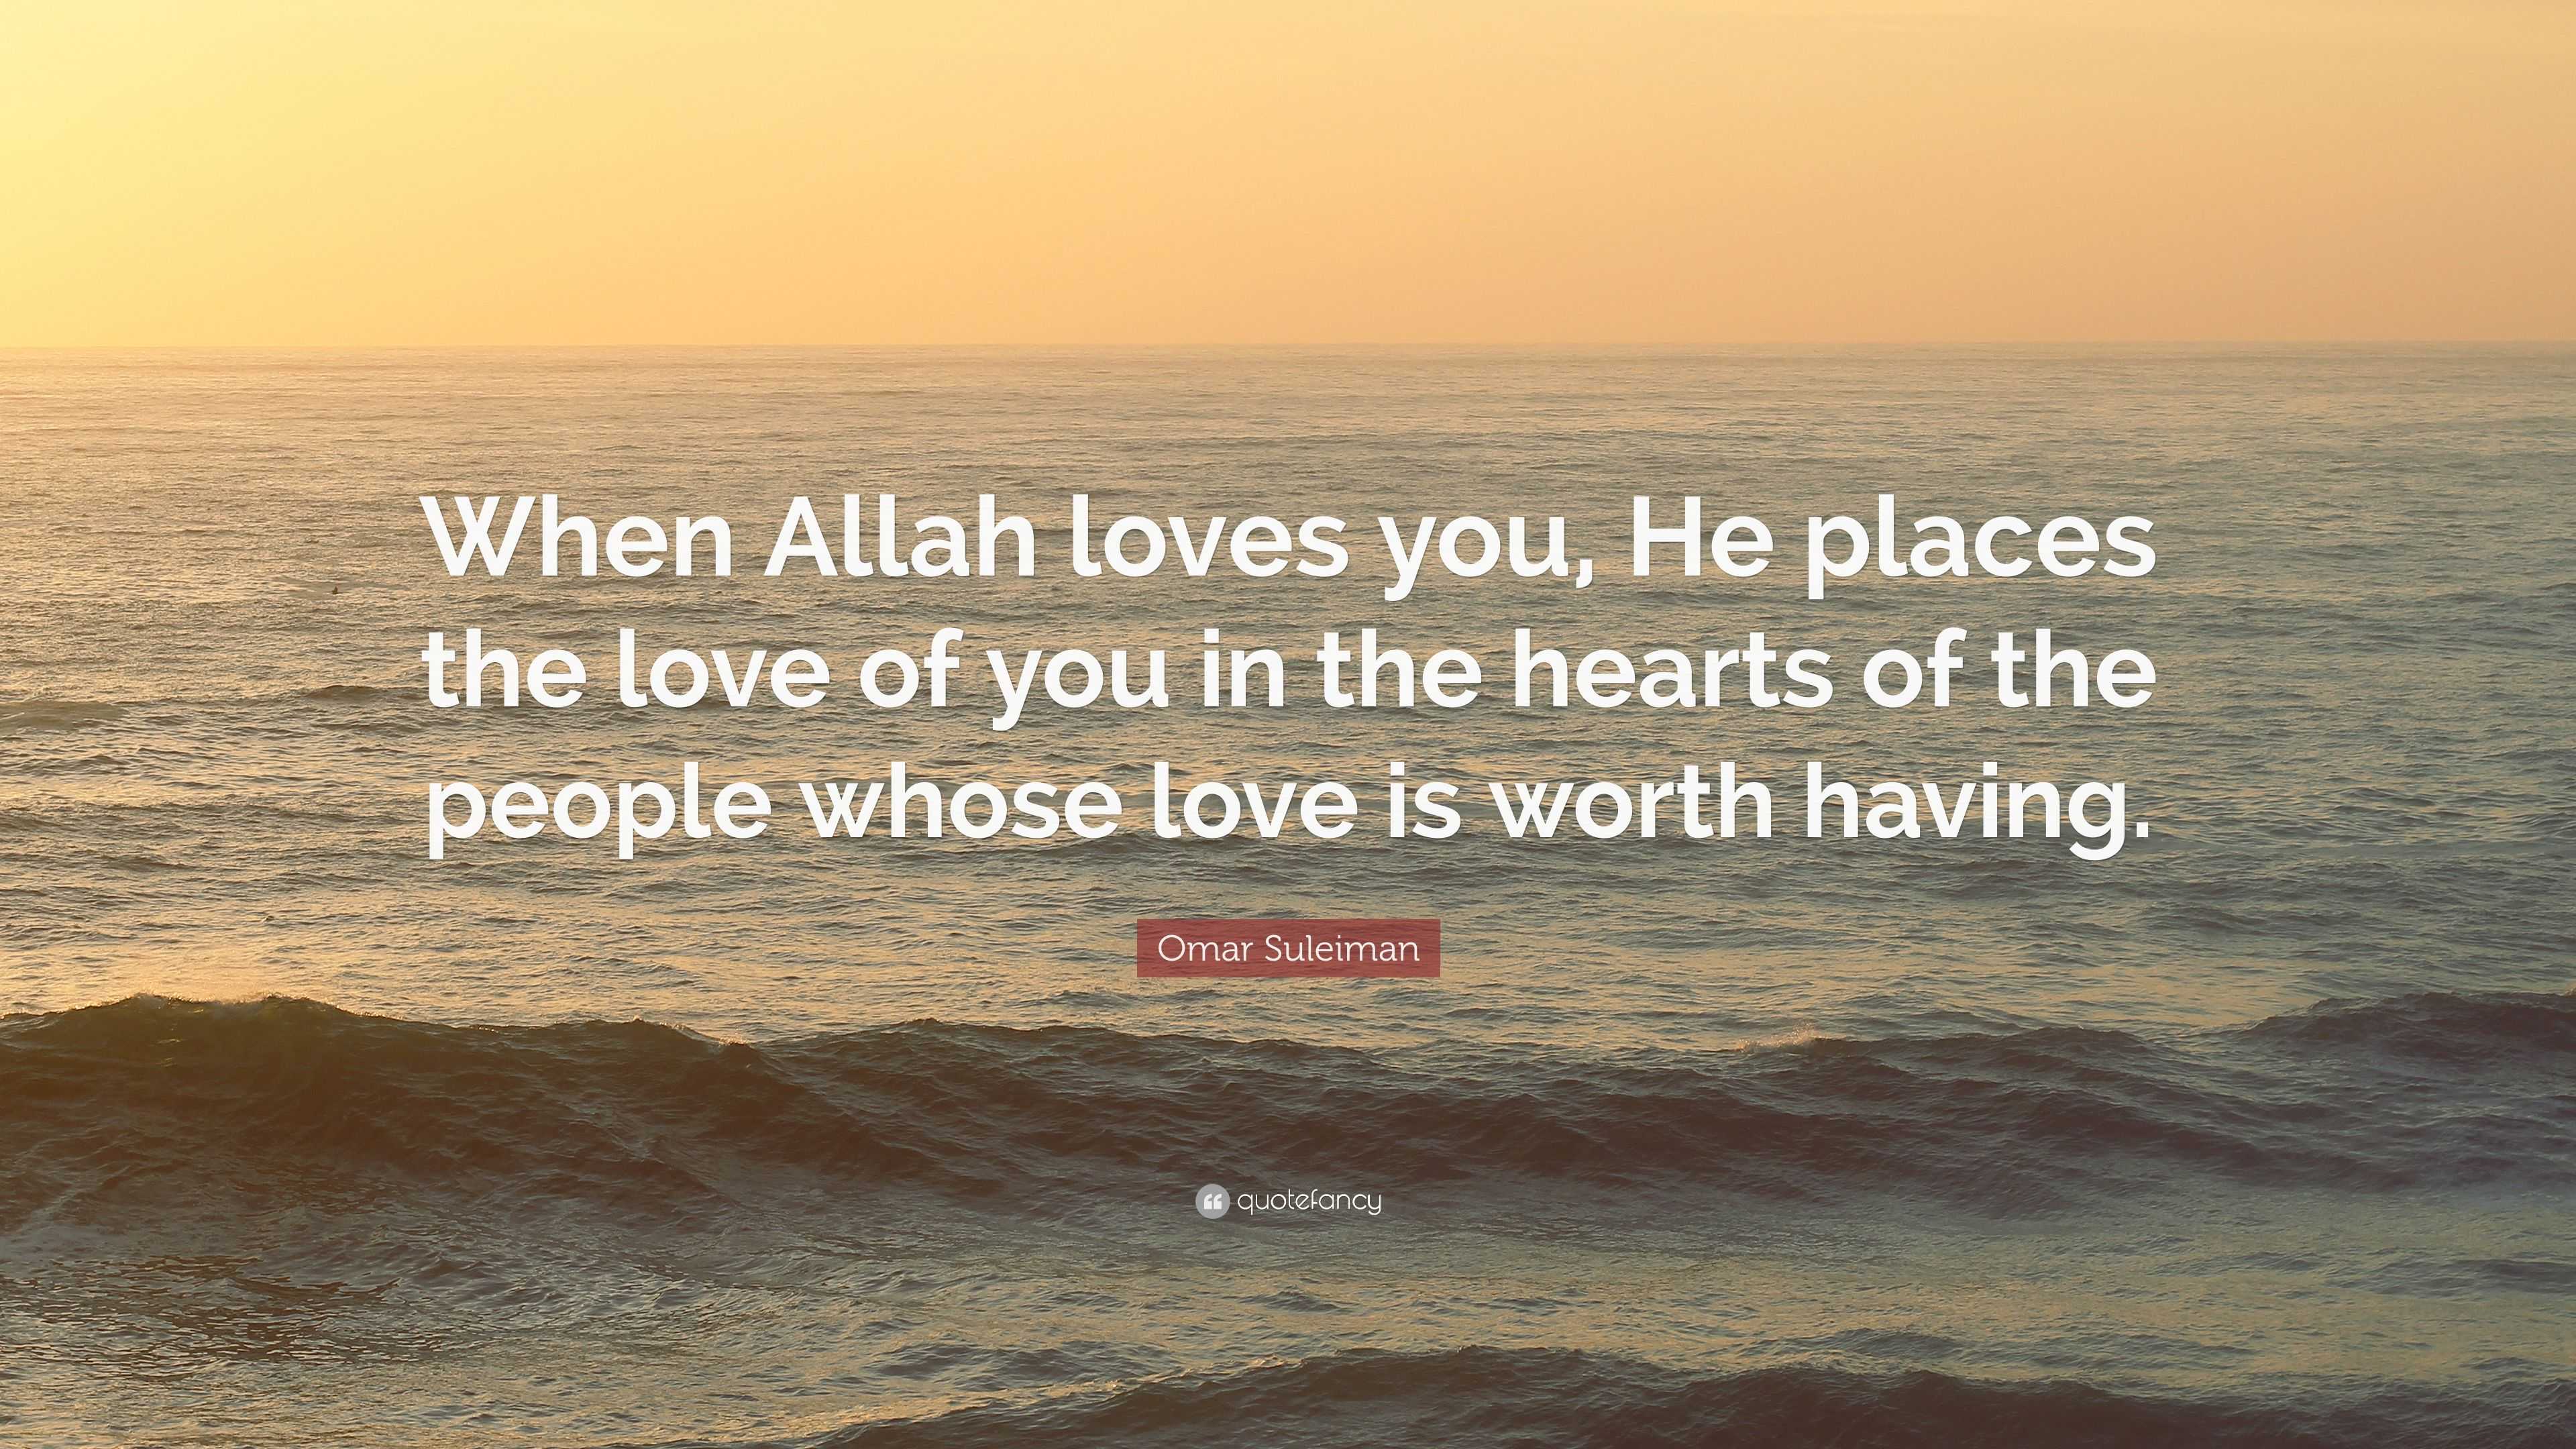 Omar Suleiman Quote “When Allah loves you, He places the love of you